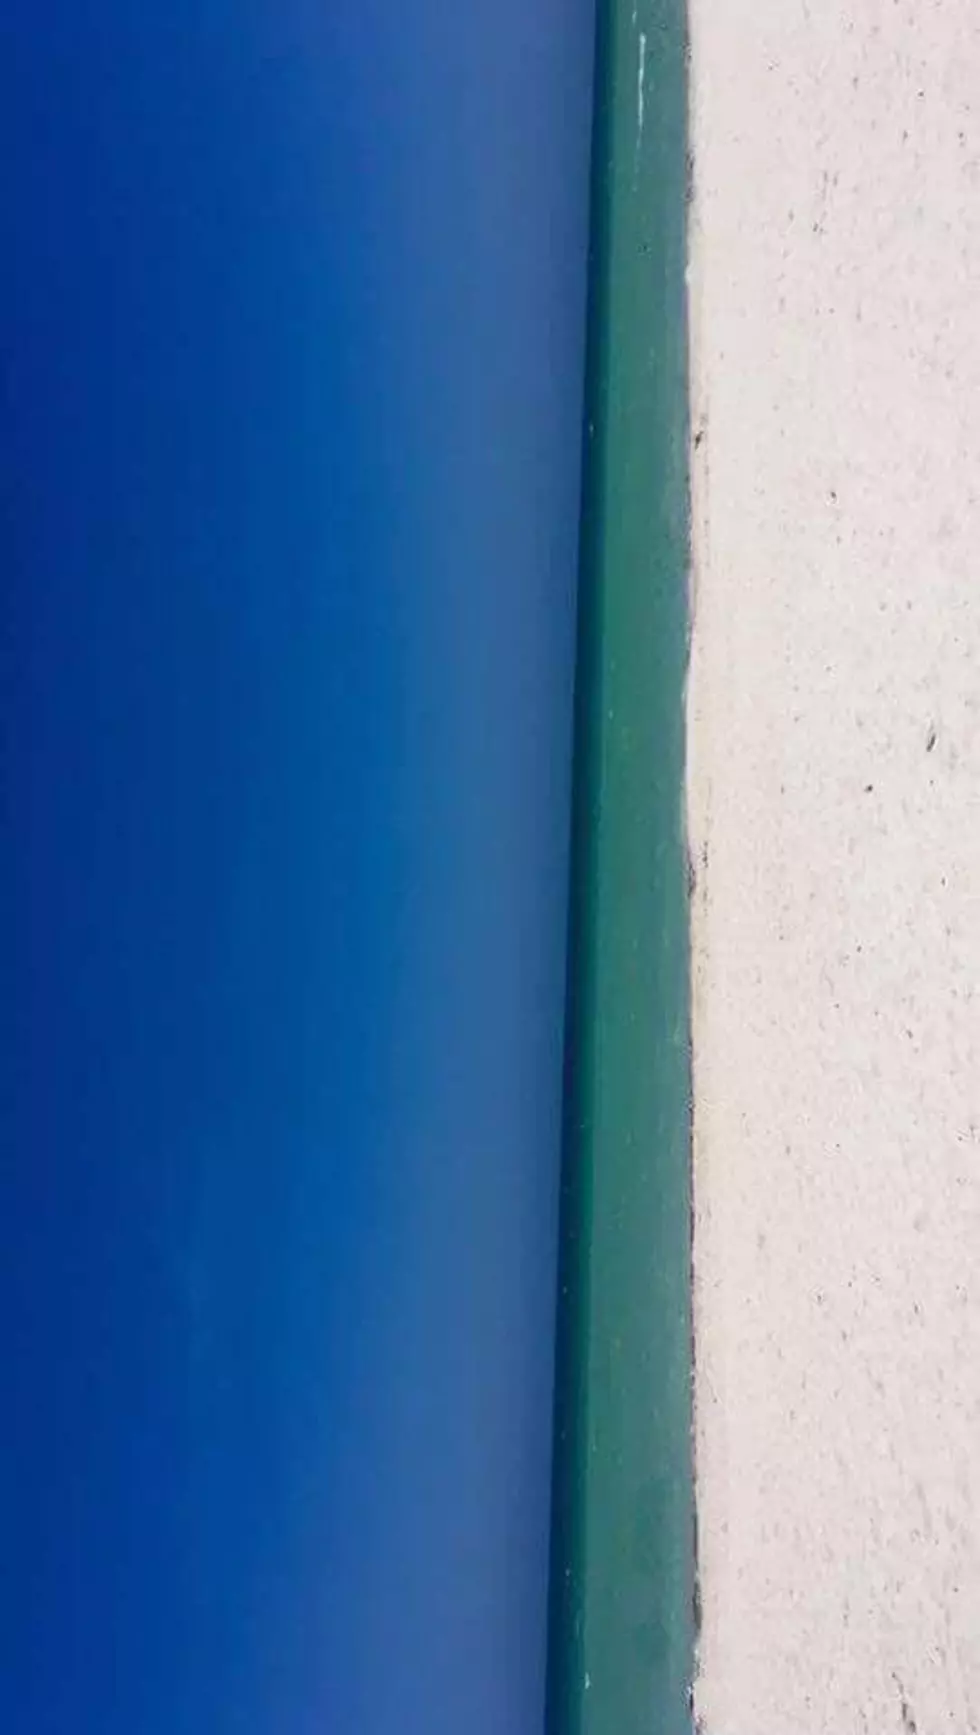 Internet Can’t Decide If This Is a Picture of the Beach or a Door